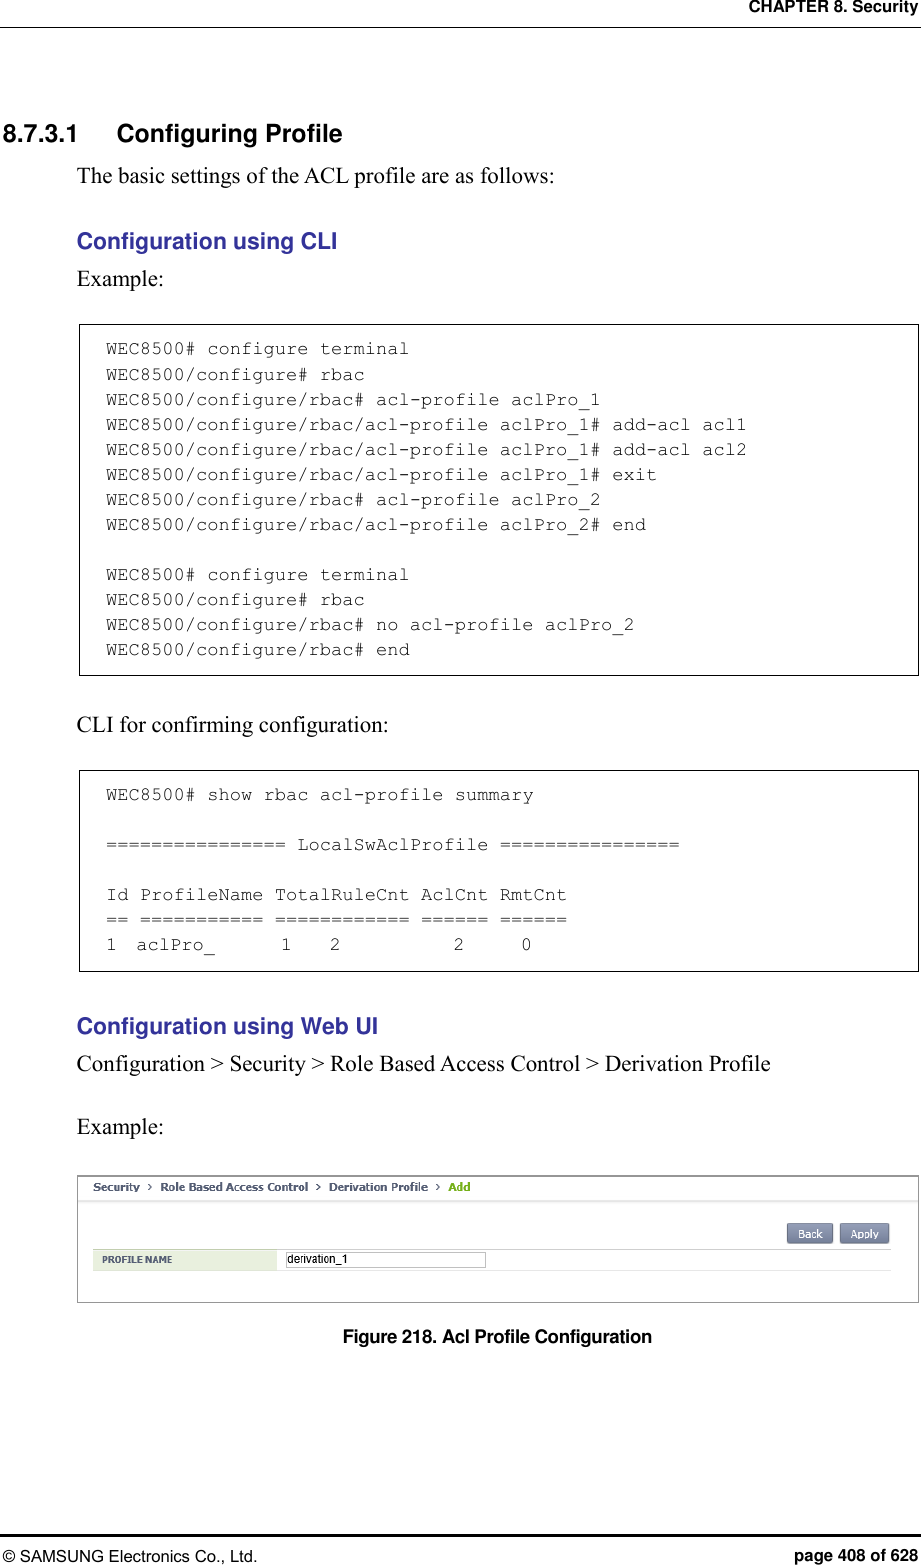 CHAPTER 8. Security © SAMSUNG Electronics Co., Ltd.  page 408 of 628 8.7.3.1  Configuring Profile The basic settings of the ACL profile are as follows:  Configuration using CLI Example:  WEC8500# configure terminal WEC8500/configure# rbac WEC8500/configure/rbac# acl-profile aclPro_1 WEC8500/configure/rbac/acl-profile aclPro_1# add-acl acl1 WEC8500/configure/rbac/acl-profile aclPro_1# add-acl acl2 WEC8500/configure/rbac/acl-profile aclPro_1# exit WEC8500/configure/rbac# acl-profile aclPro_2 WEC8500/configure/rbac/acl-profile aclPro_2# end  WEC8500# configure terminal WEC8500/configure# rbac WEC8500/configure/rbac# no acl-profile aclPro_2 WEC8500/configure/rbac# end  CLI for confirming configuration:  WEC8500# show rbac acl-profile summary  ================ LocalSwAclProfile ================  Id ProfileName TotalRuleCnt AclCnt RmtCnt == =========== ============ ====== ====== 1  aclPro_       1    2            2      0  Configuration using Web UI Configuration &gt; Security &gt; Role Based Access Control &gt; Derivation Profile  Example:  Figure 218. Acl Profile Configuration    